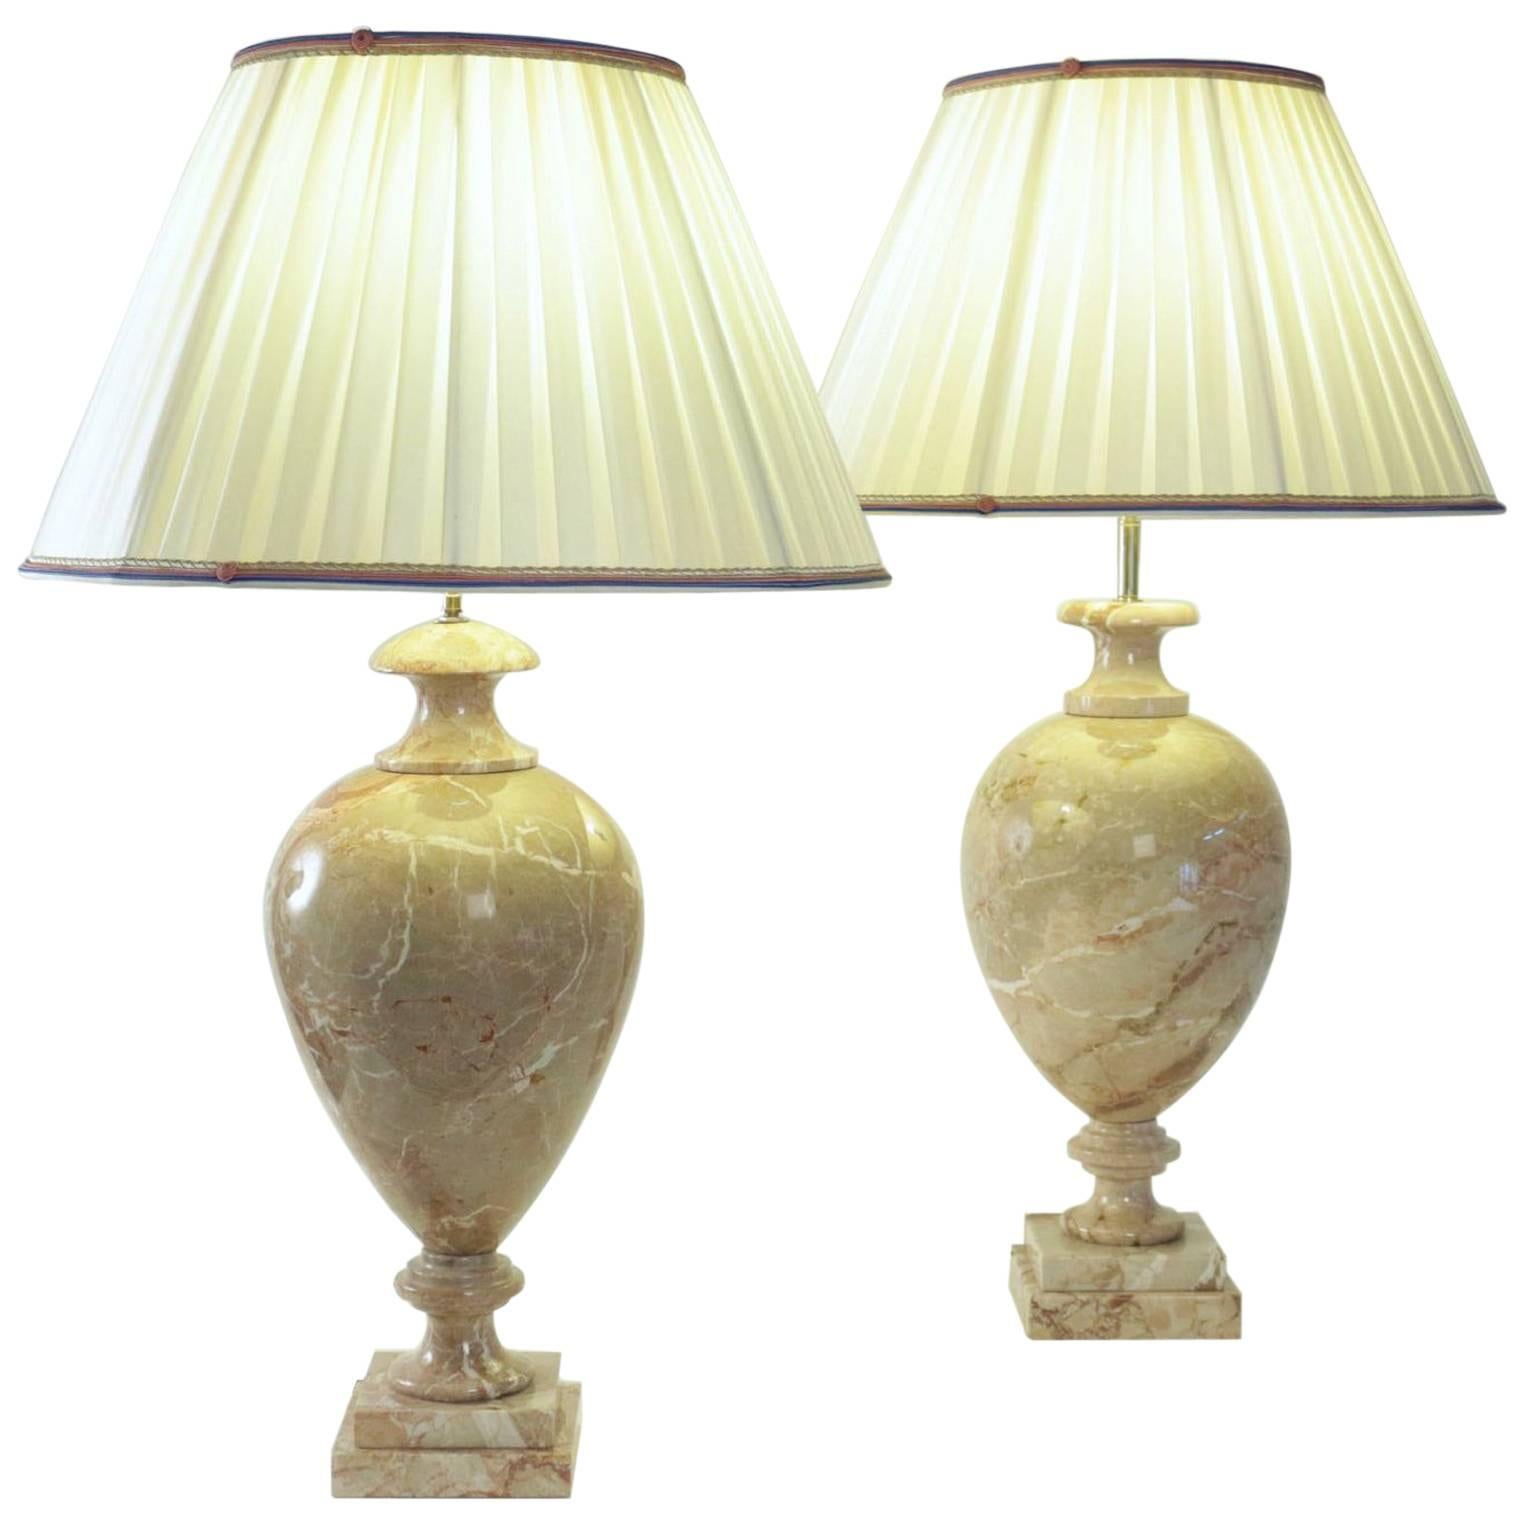 Pair of Marble Lamps from the 20th Century